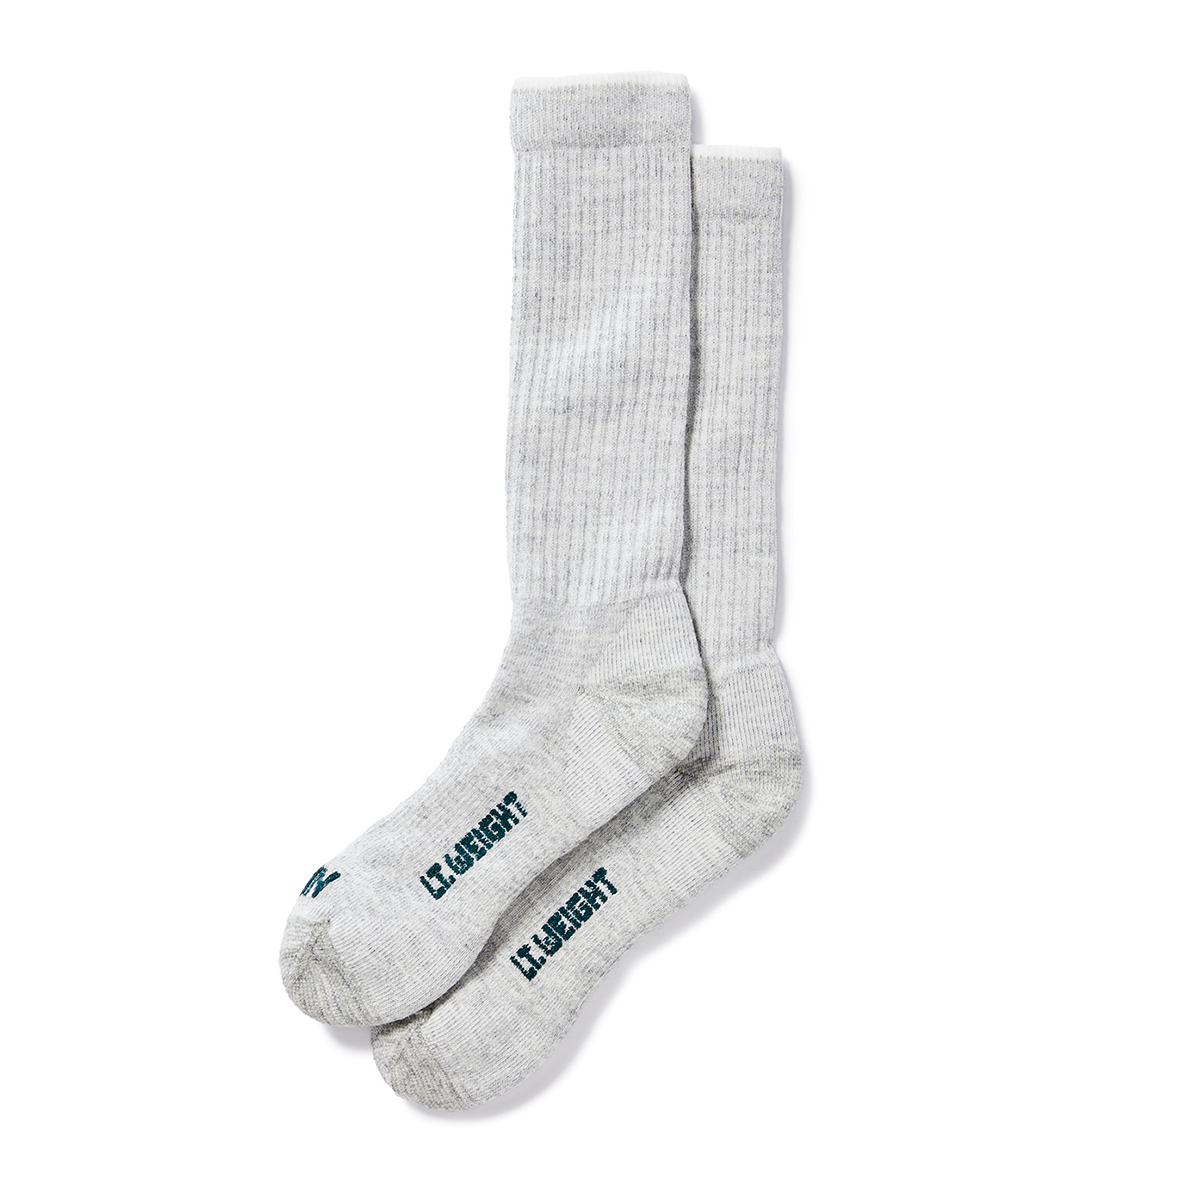 Filson Lightweight Traditional Crew Socks use merino wool with a touch of nylon and spandex